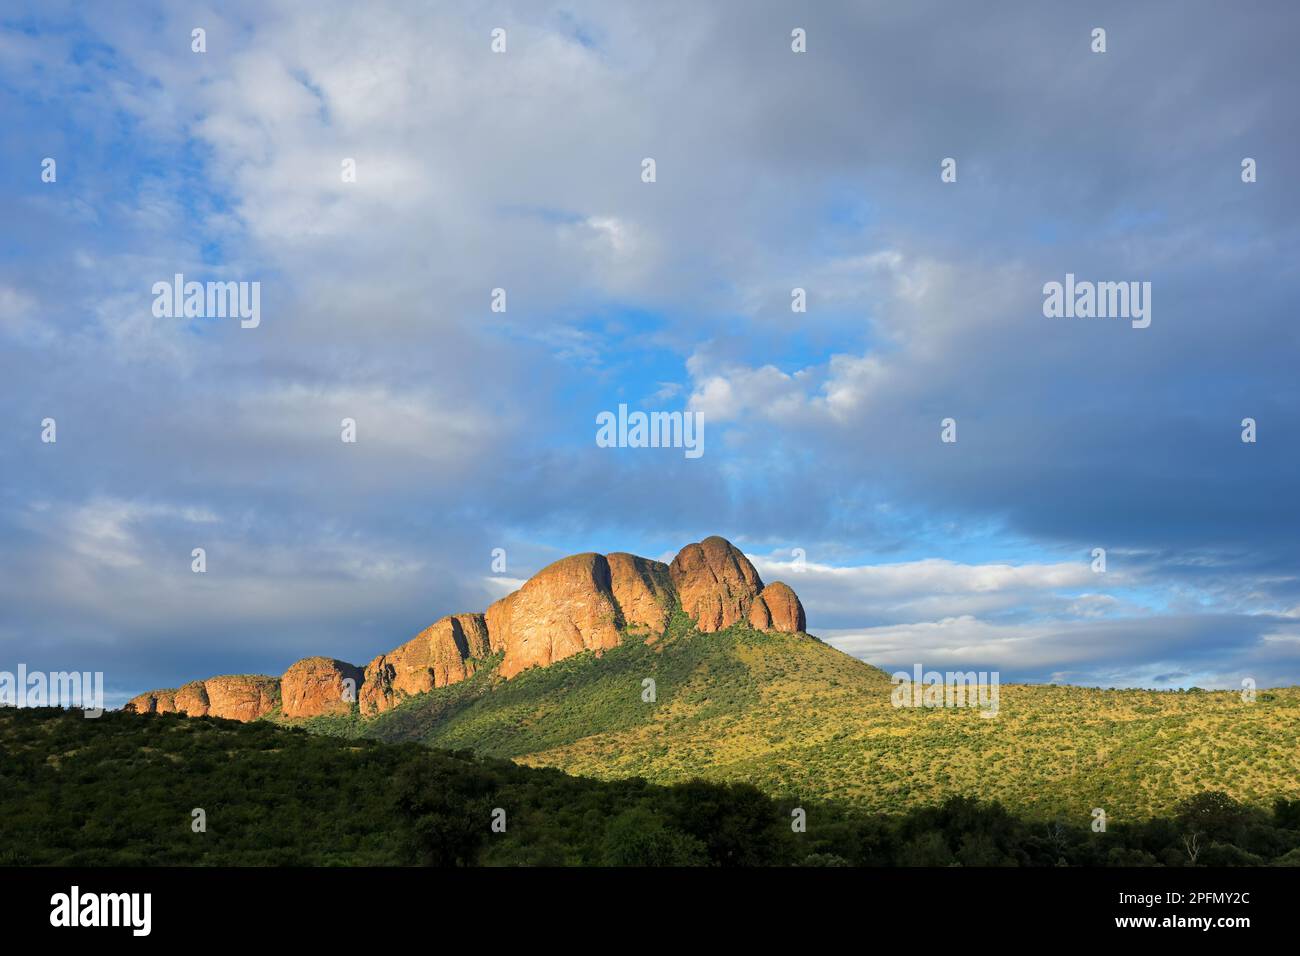 Scenic mountain landscape with cloudy sky, Marakele National Park, South Africa Stock Photo